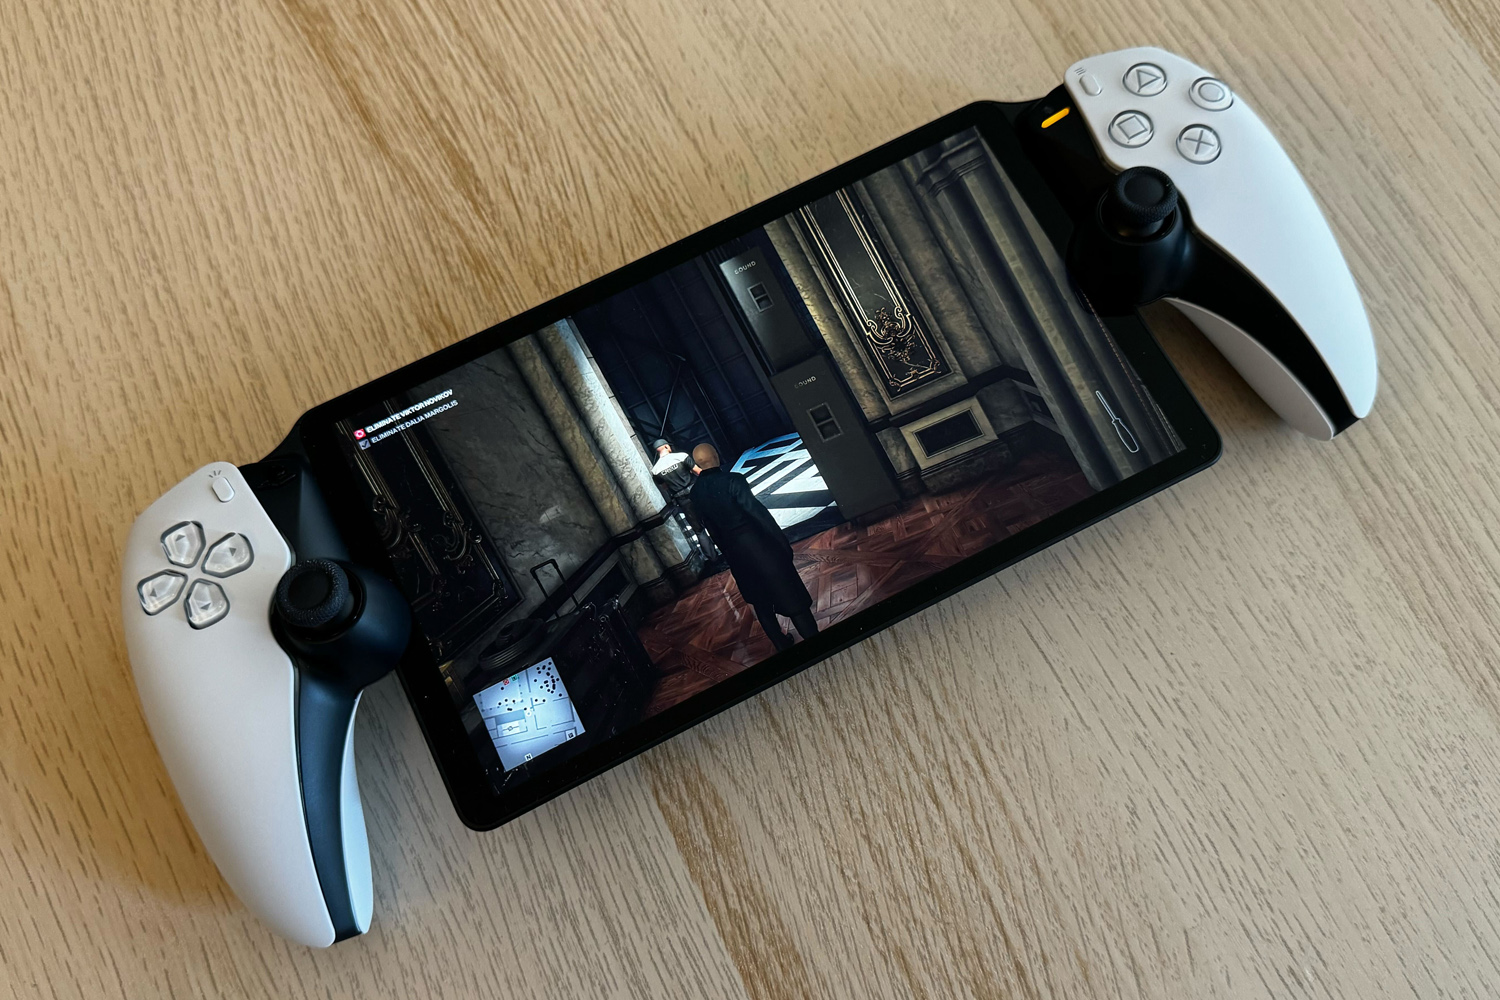 Sony Unveils The PlayStation Portal: A Remote Play Handheld For